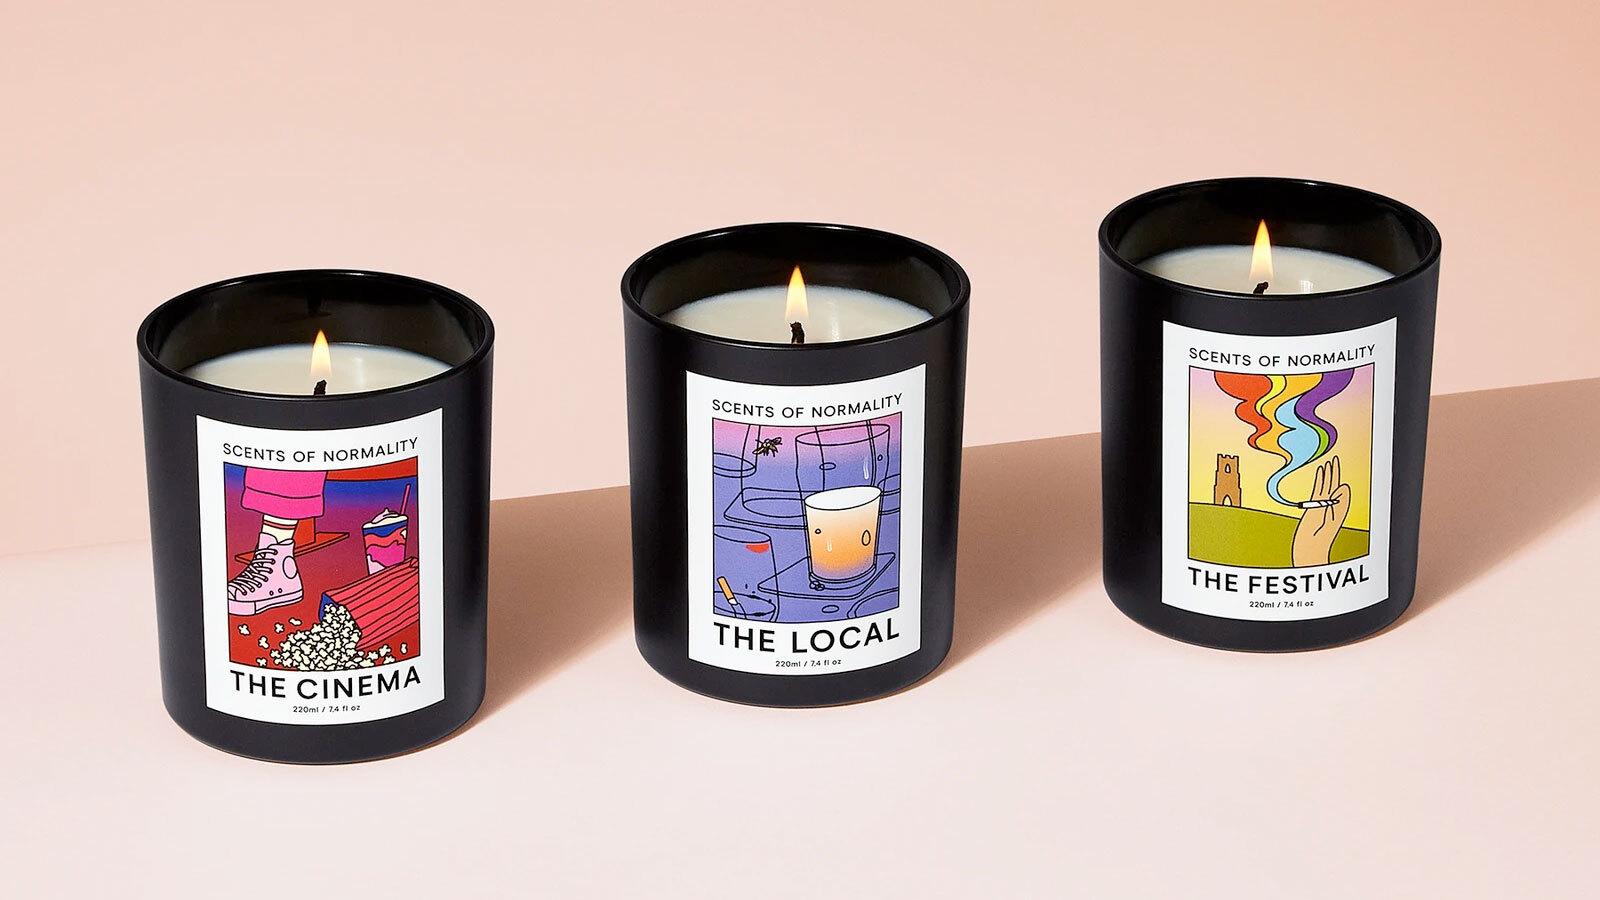 Three candle jars with colorful labels